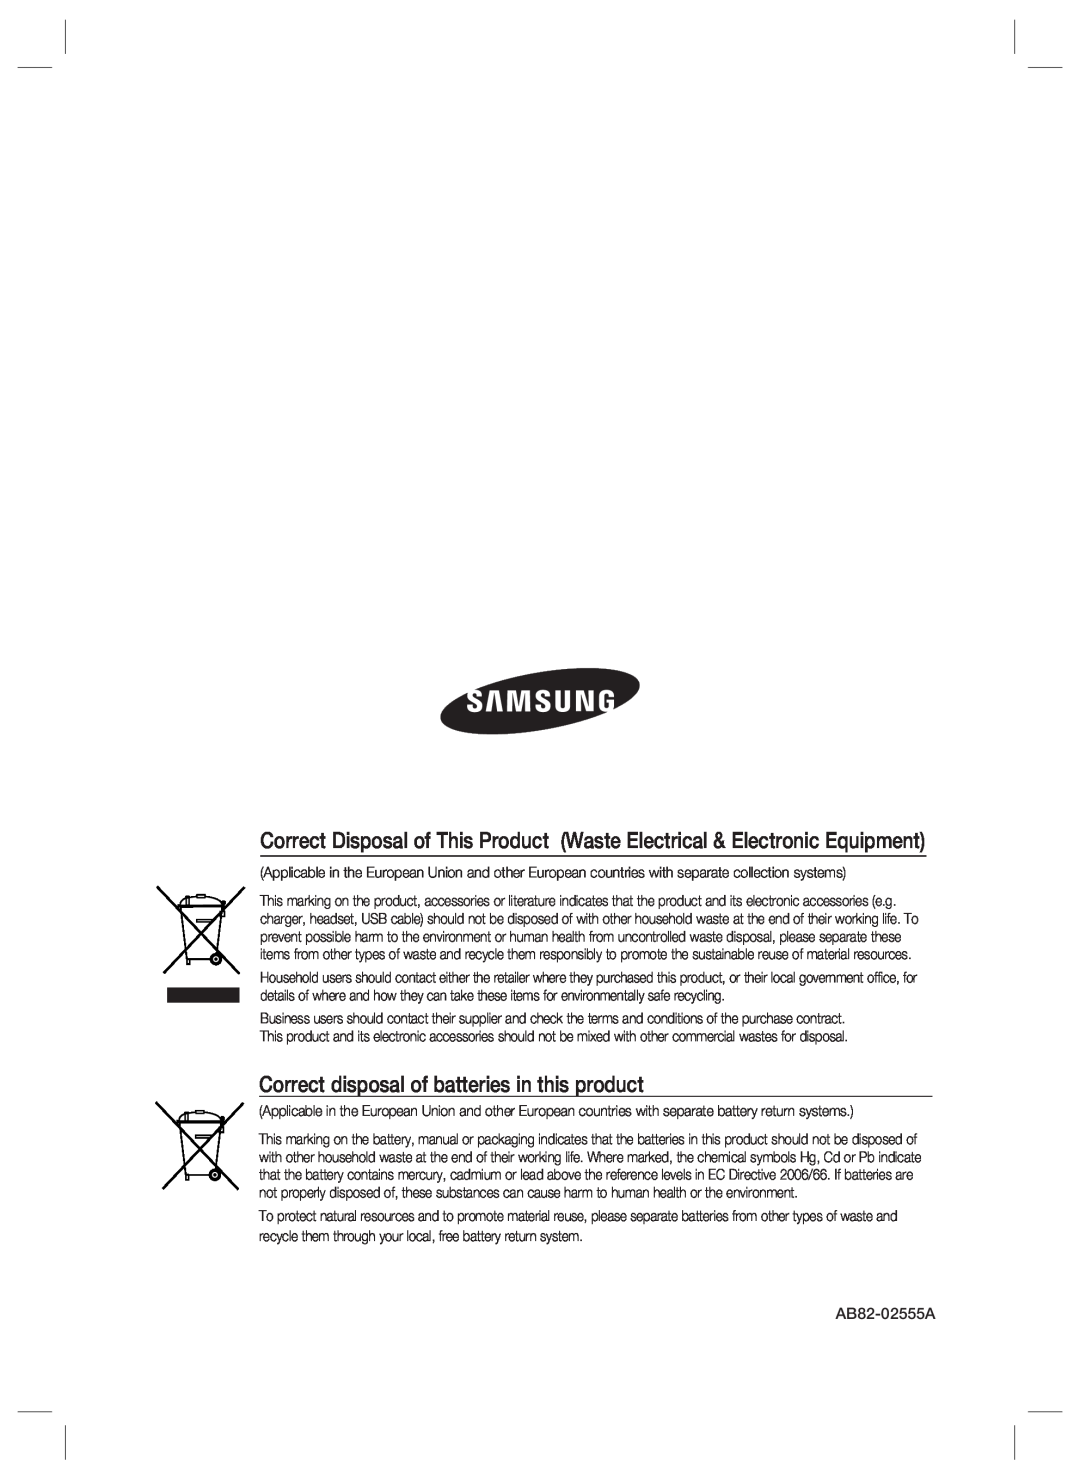 Samsung SSA-P400T, SSA-P401T user manual Correct disposal of batteries in this product 